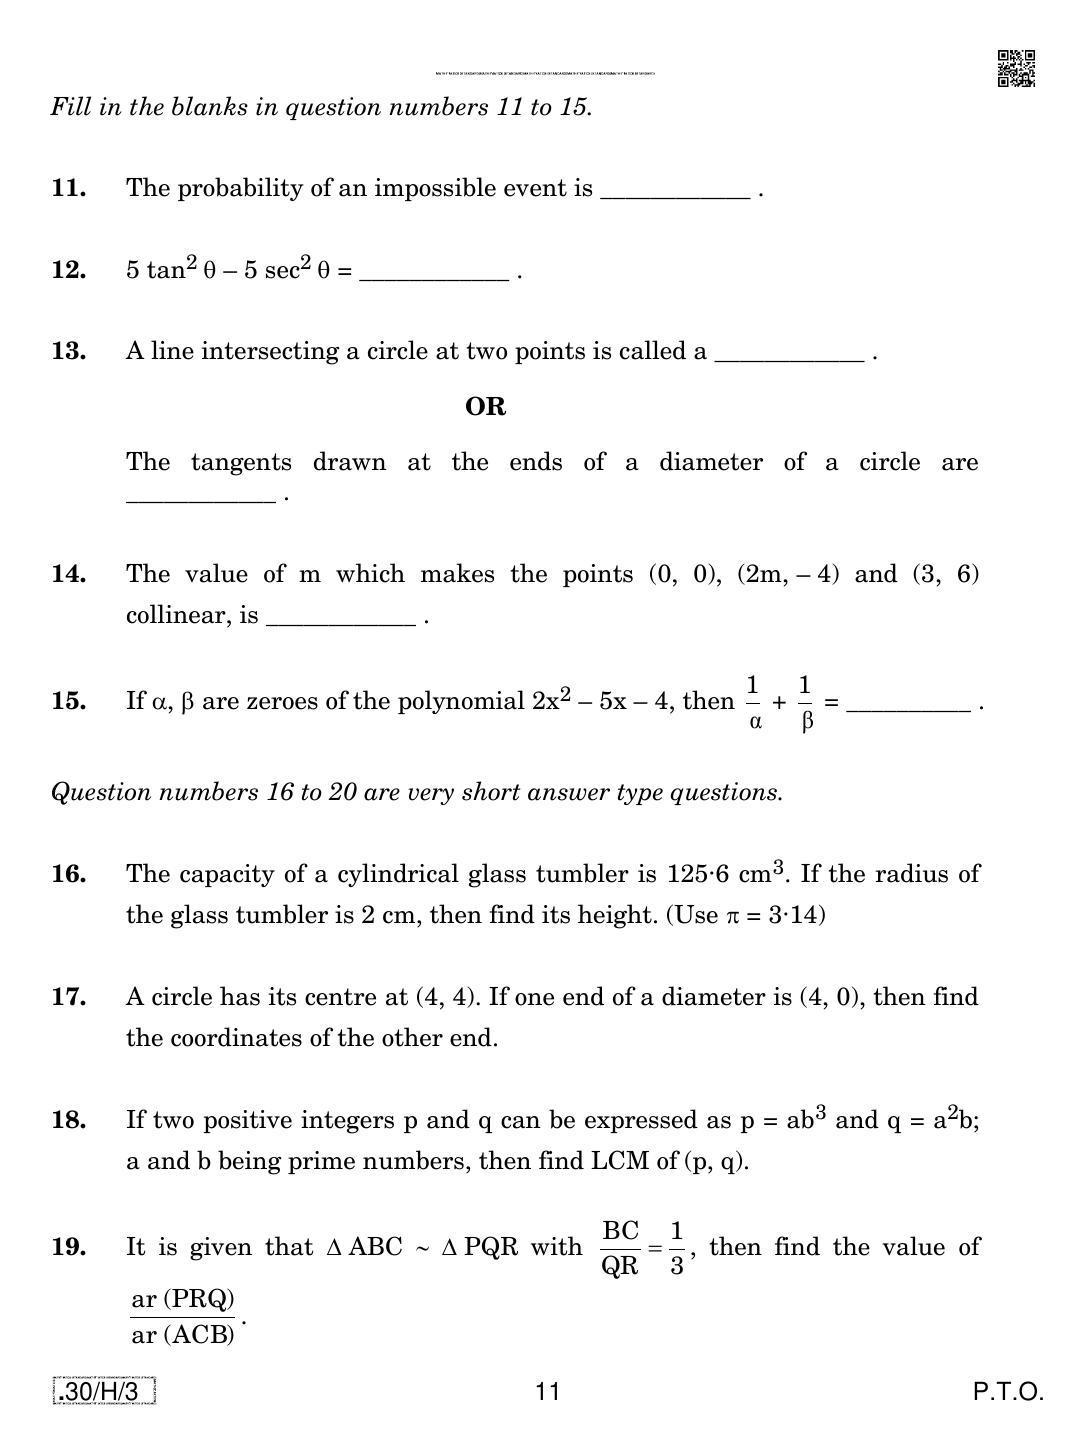 CBSE Class 10 30-C-3 - Maths (Standard) 2020 Compartment Question Paper - Page 11